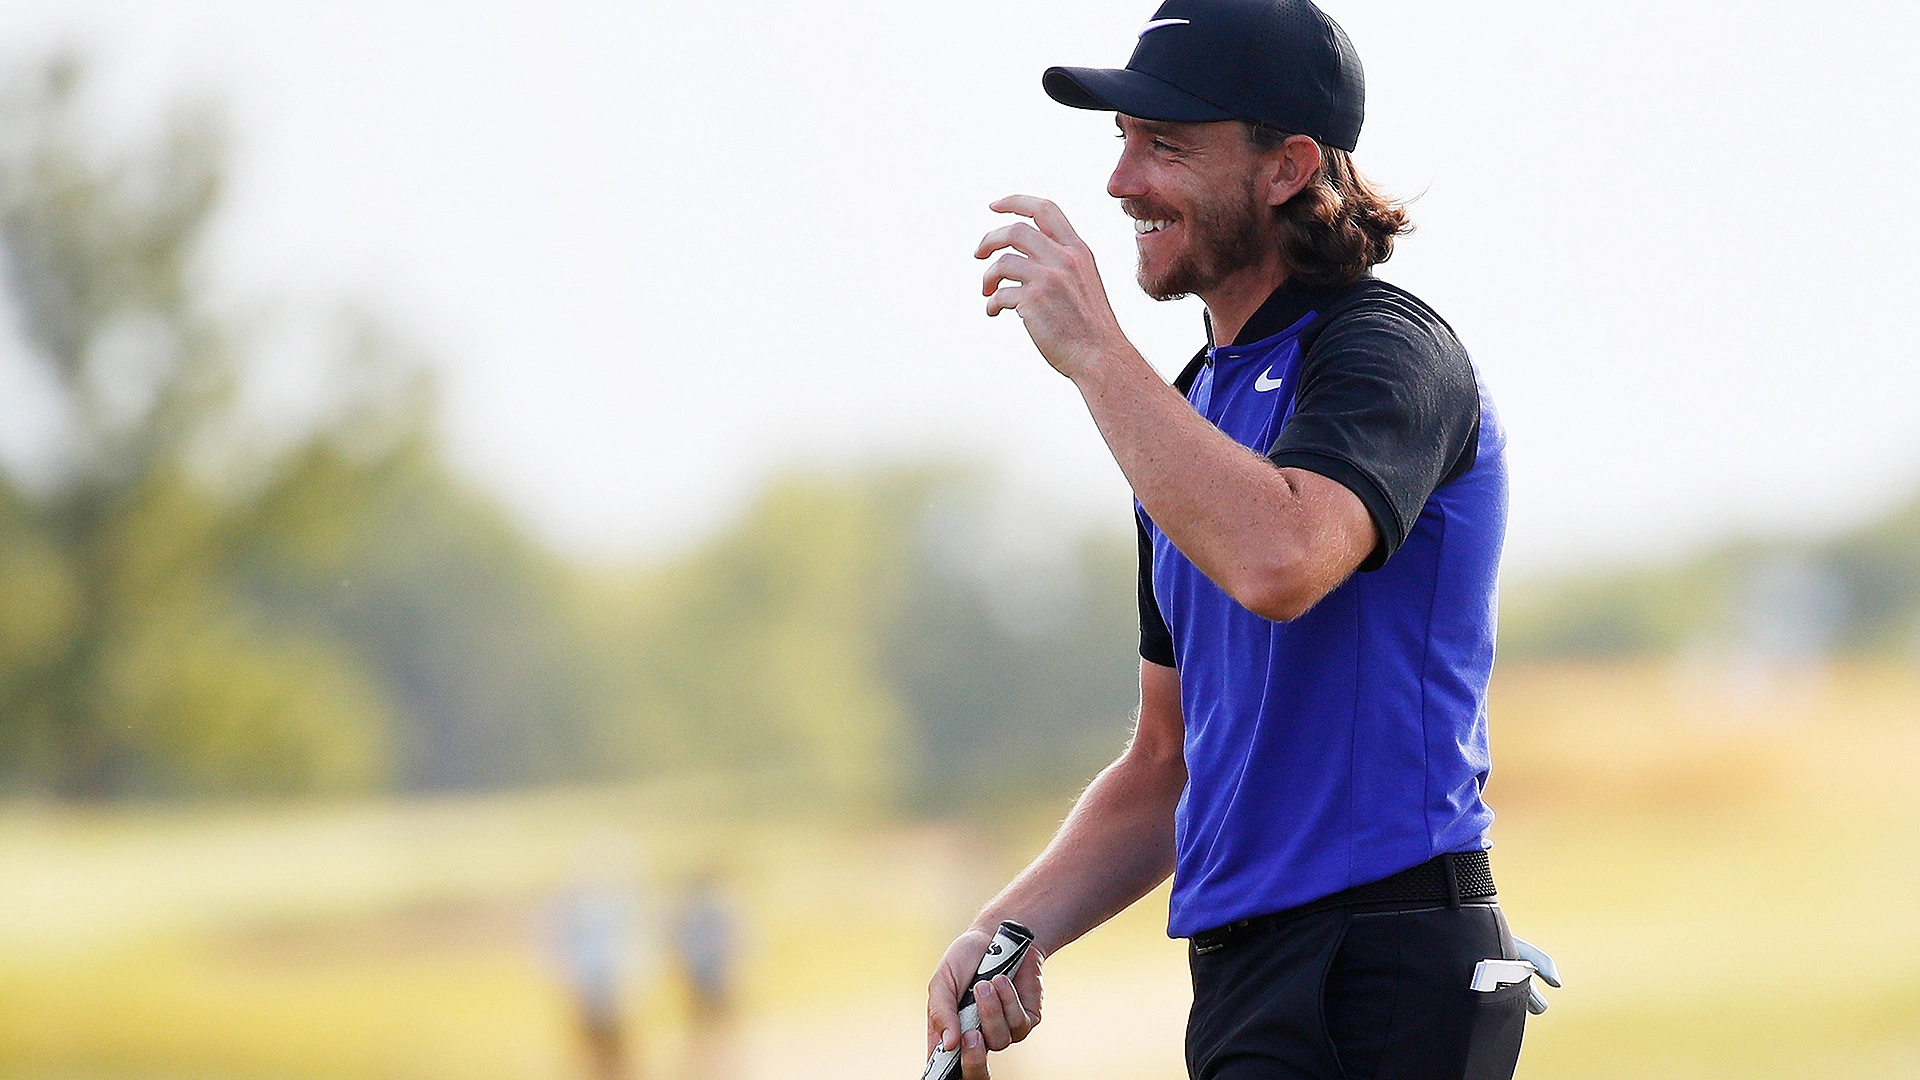 Co-leader Fleetwood can earn Tour card at U.S Open 10